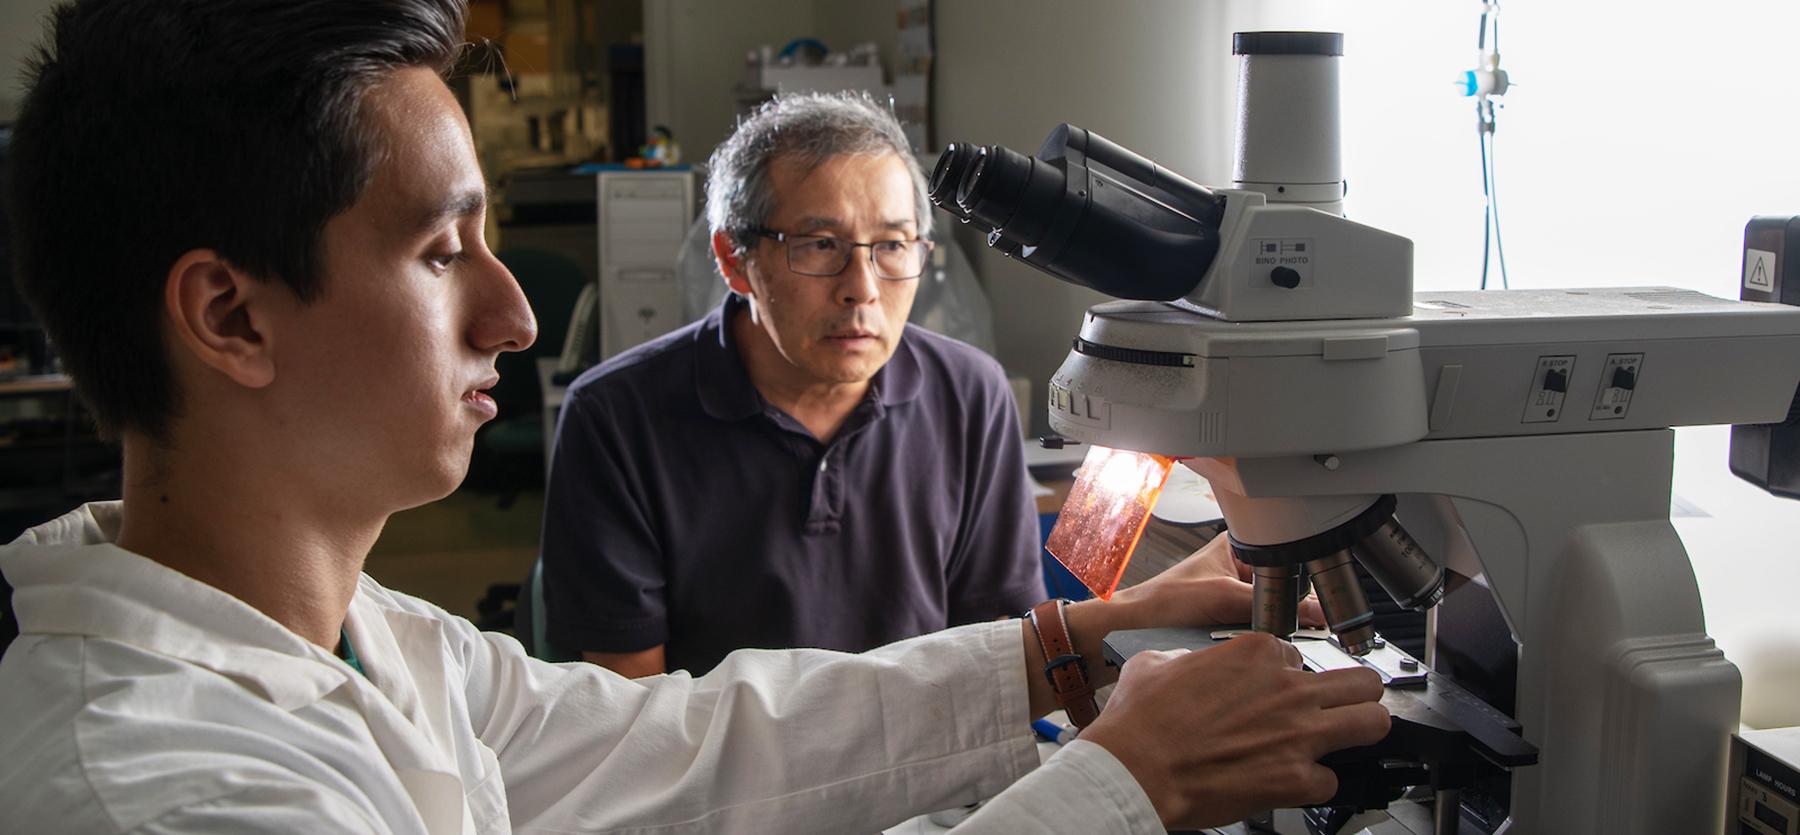 A student and professor examine something under a microscope.